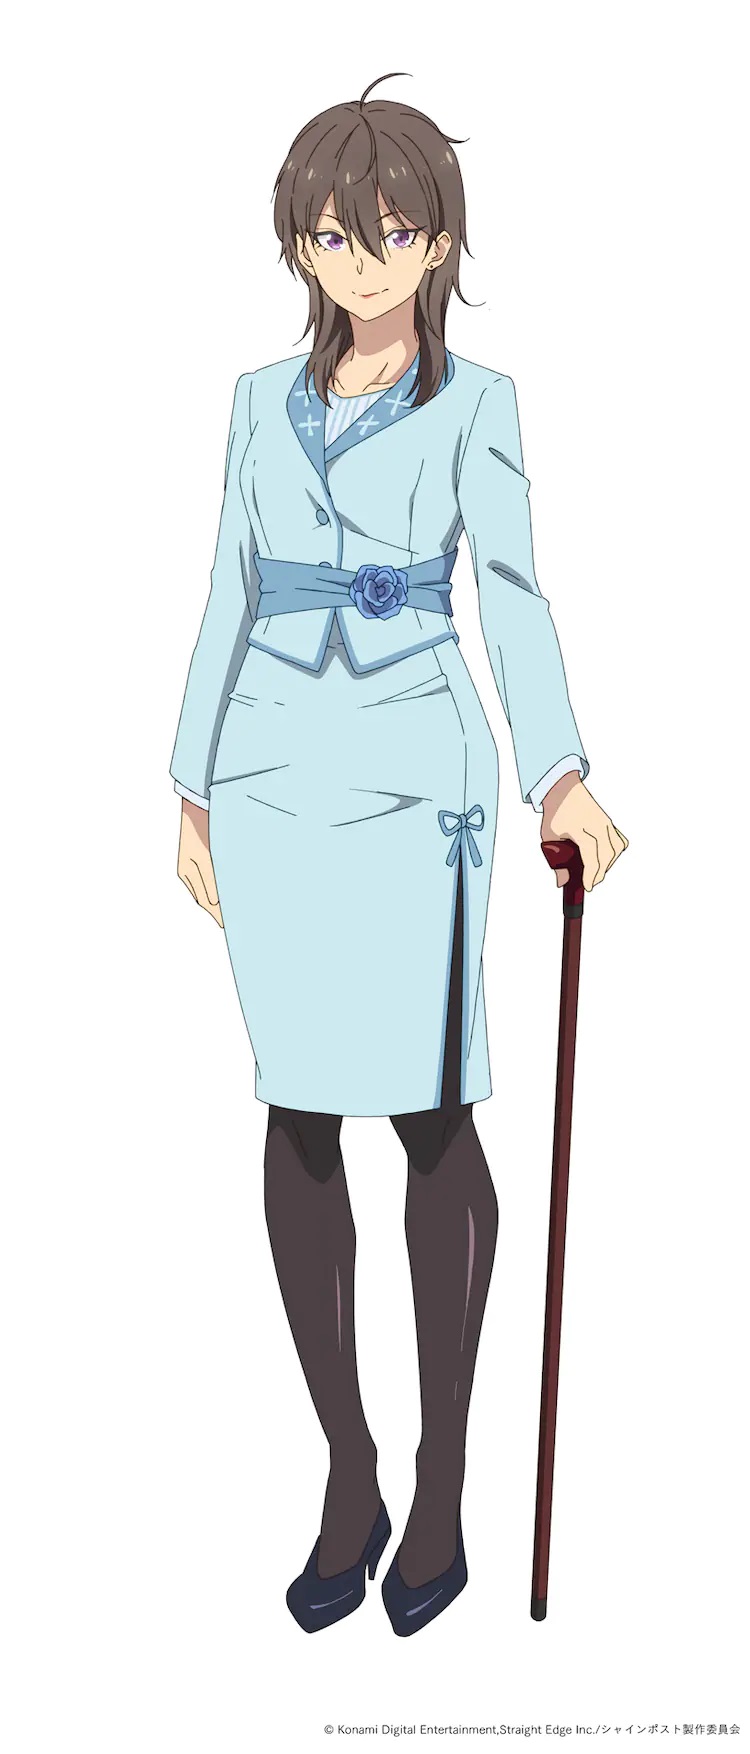 A character visual of Yuuki Hinase from the upcoming SHINE POST TV anime. Yuuki is a mature woman with brown hair and purple eyes who wears a light blue Chanel suit, stockings, and high heeled shoes. She supports herself with a cane in her left hand.